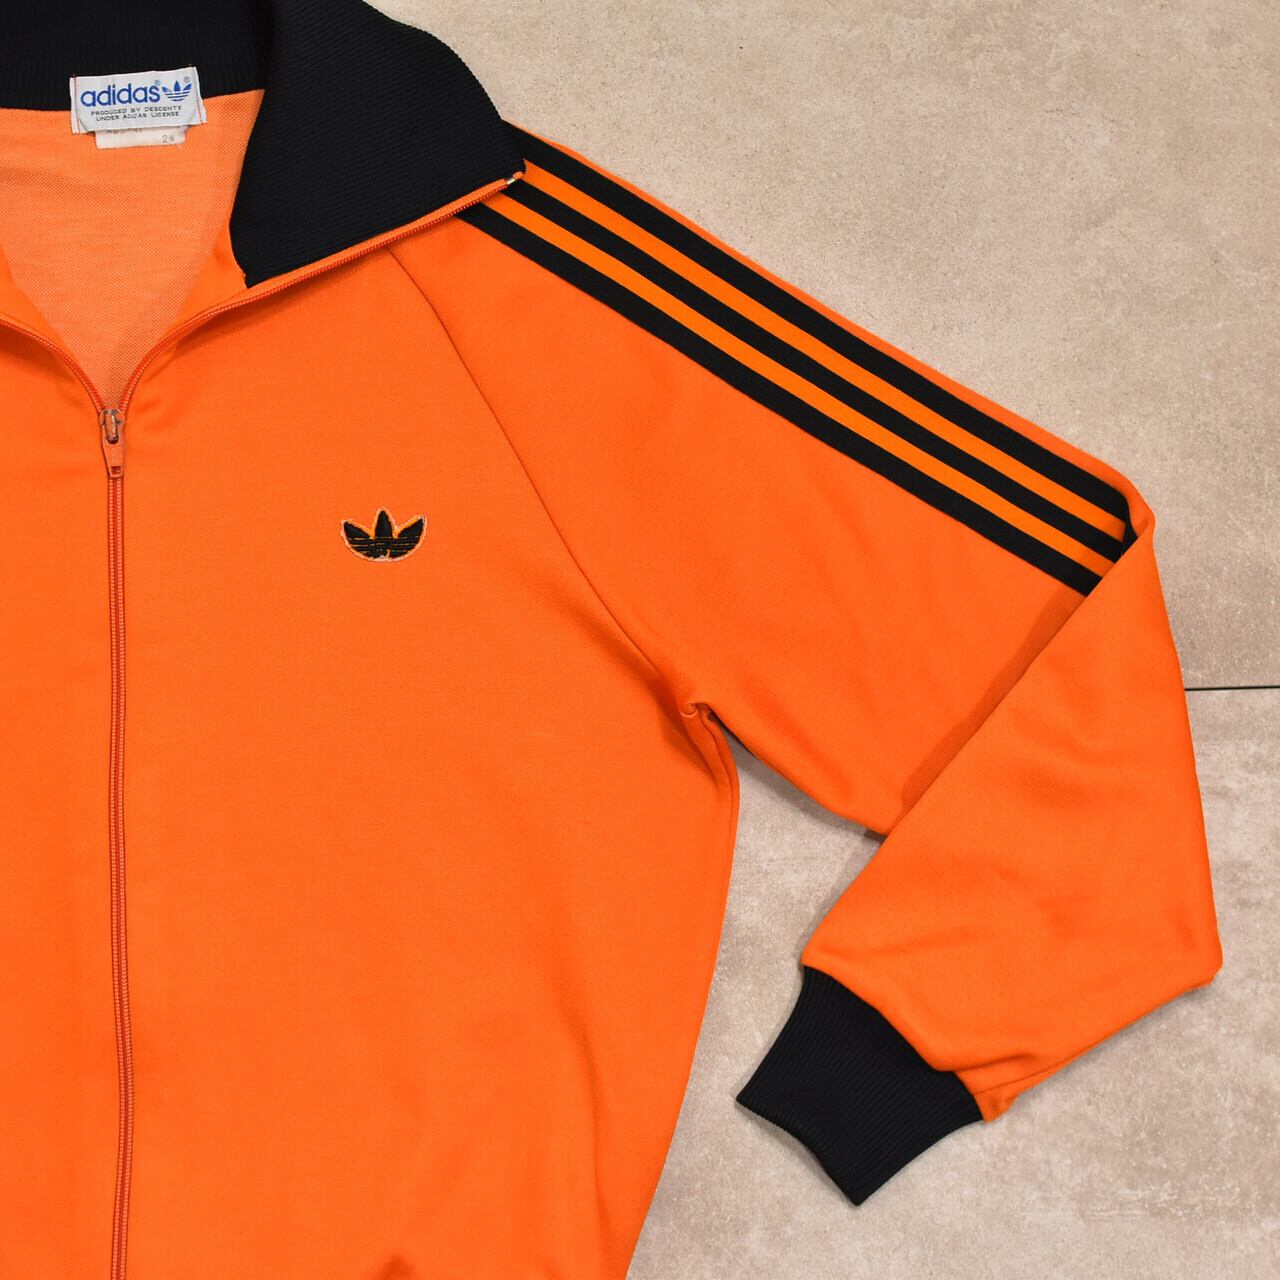 70s adidas by DESENT track jacket | 古着屋 grin days memory